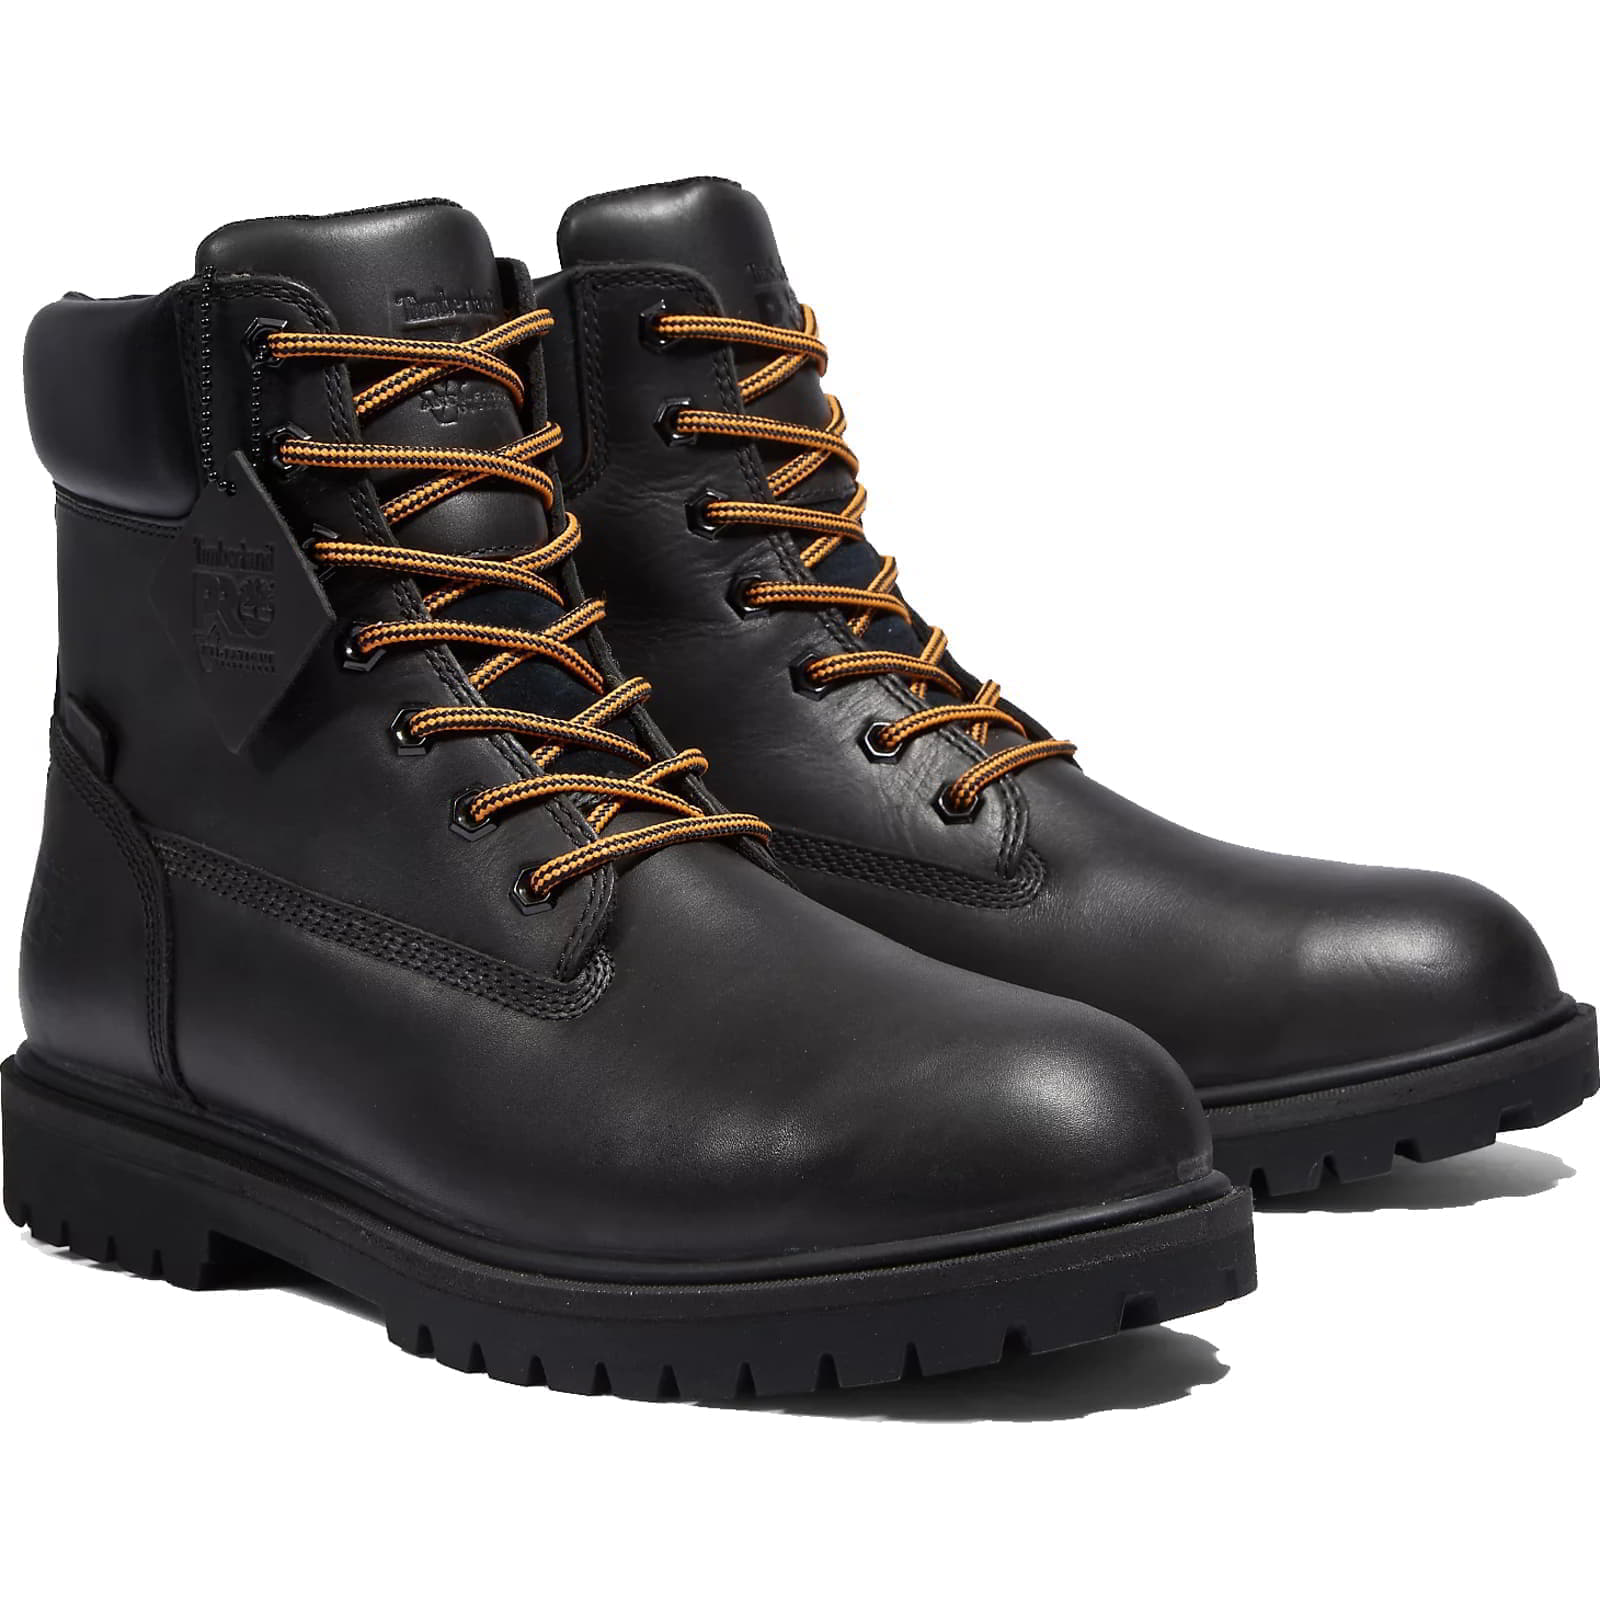 Timberland Pro Mens Iconic Waterproof Safety Toe Cap Work Ankle Boots - UK 14